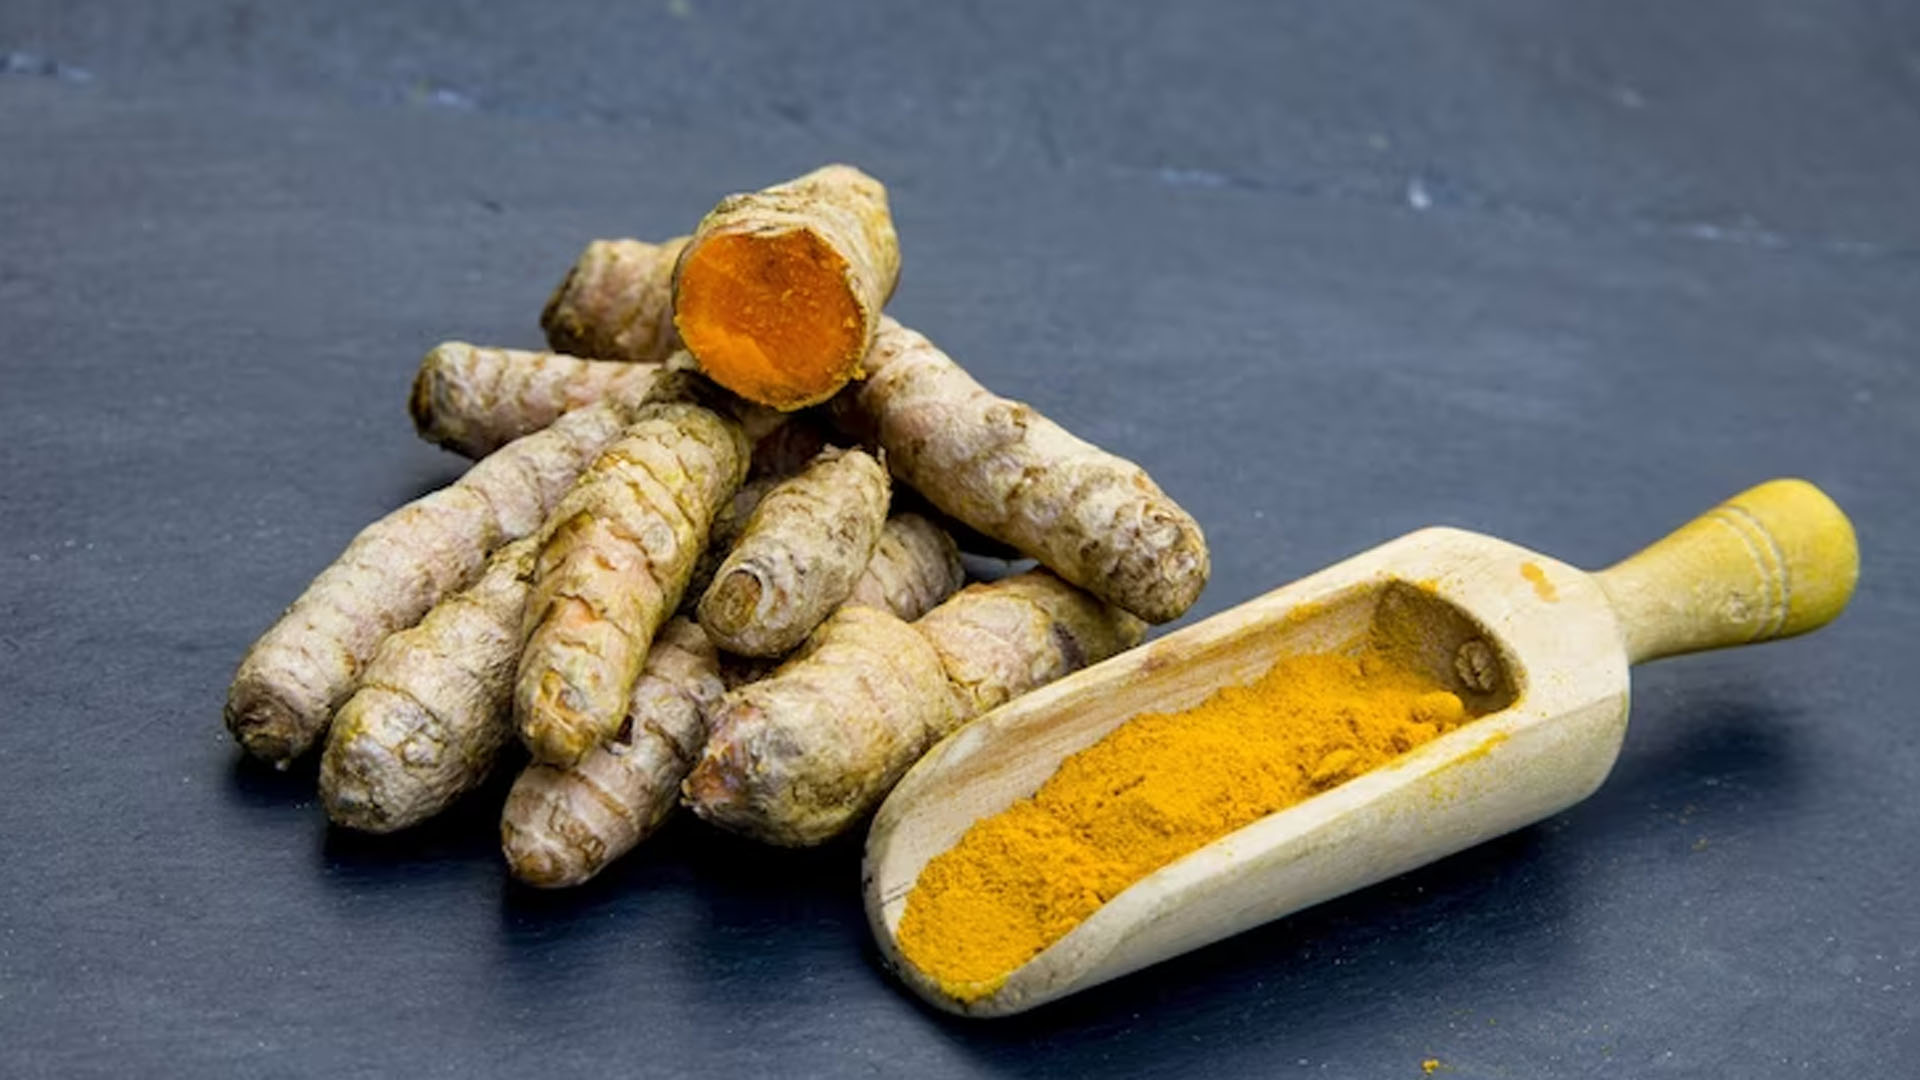 What Are The Health Benefits of Turmeric Capsules?